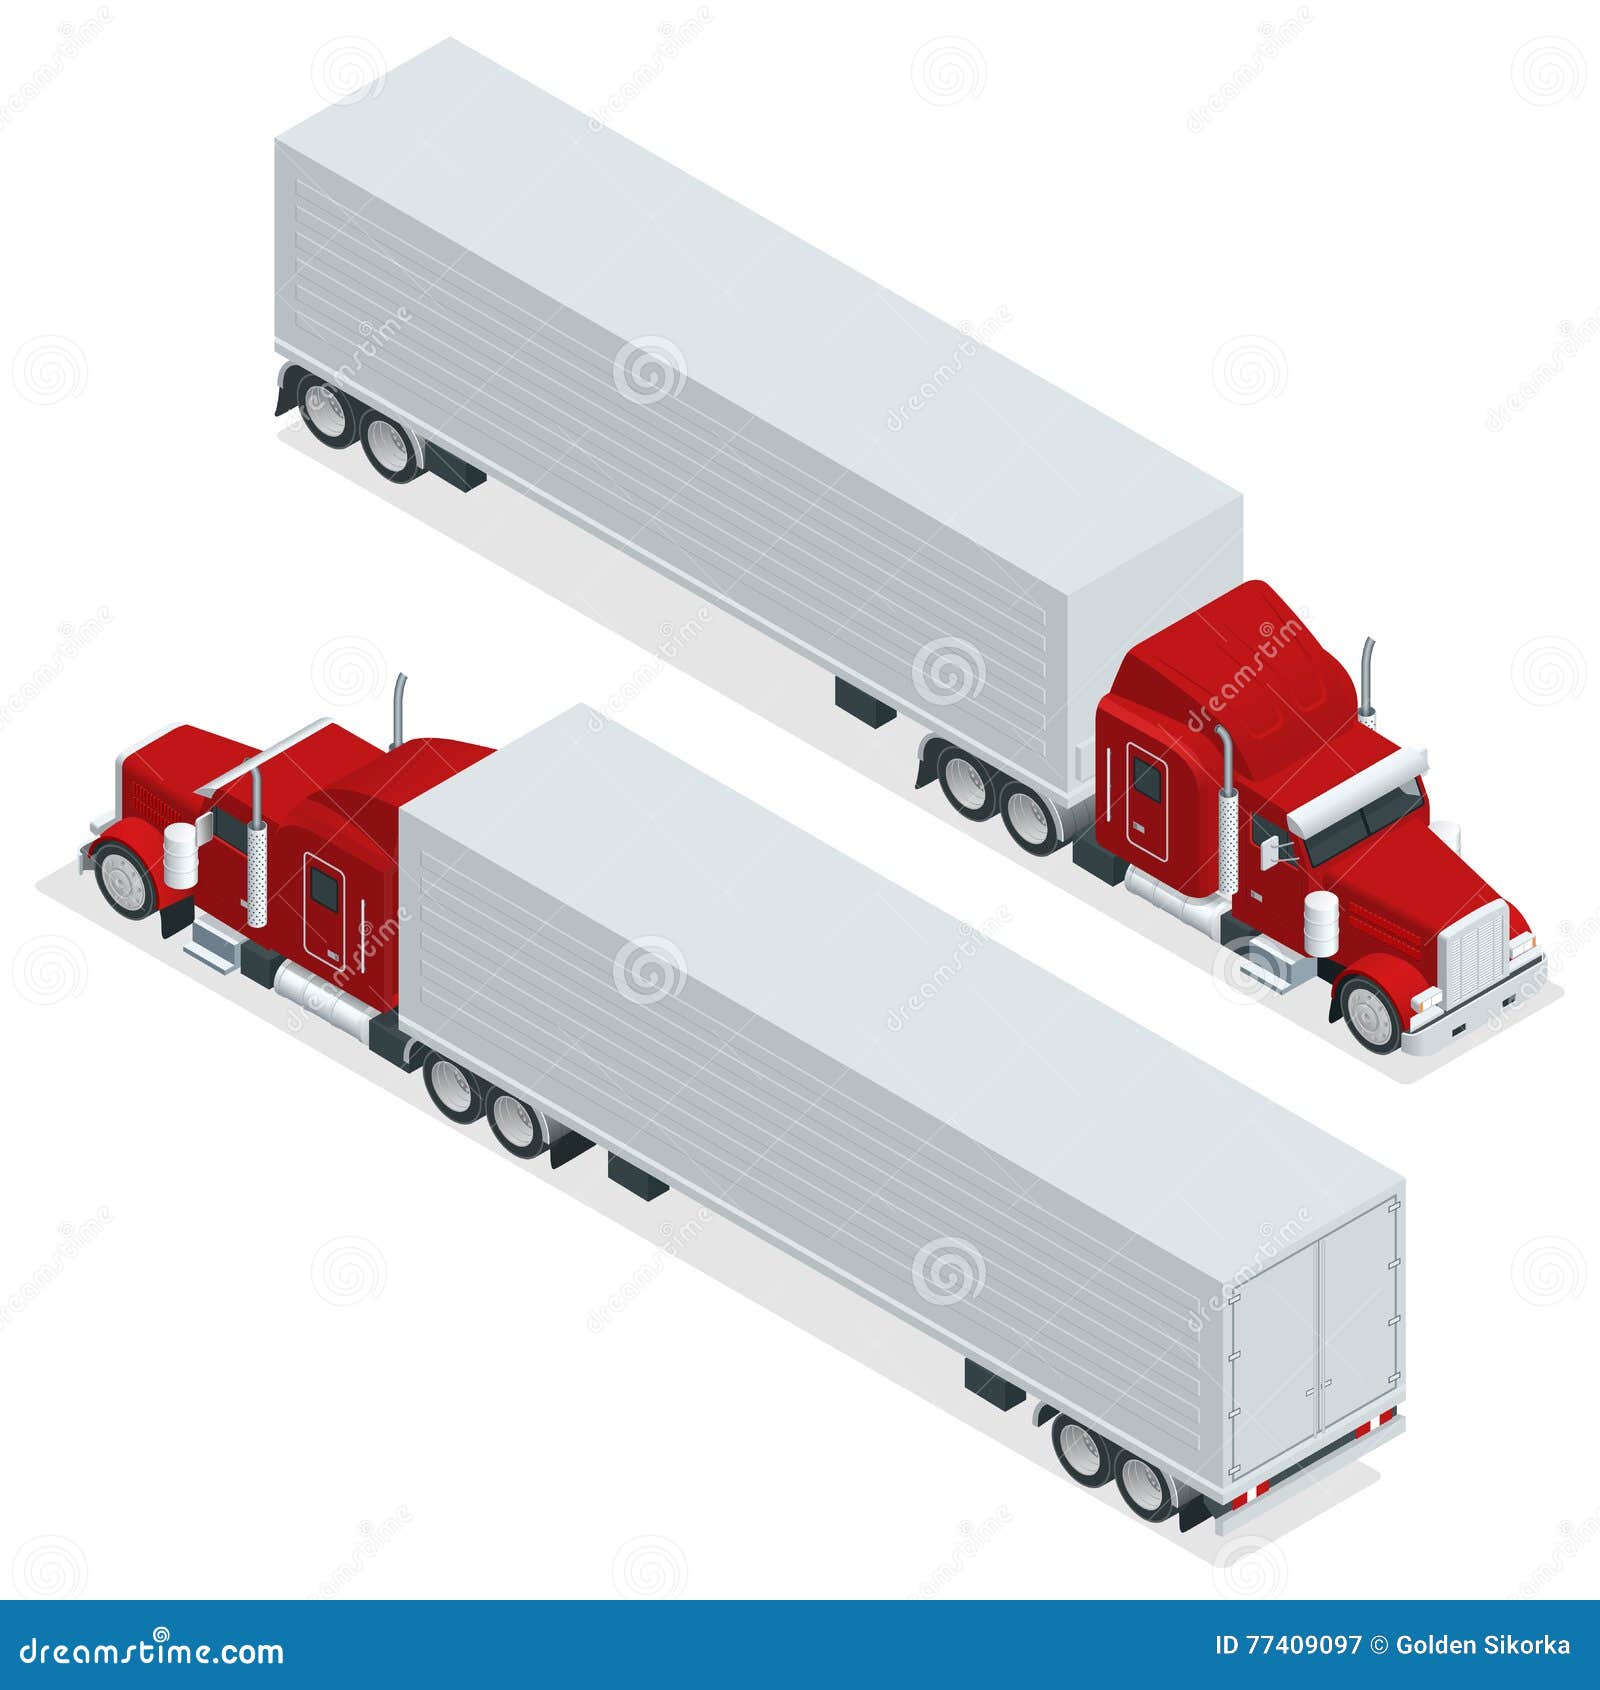 isometric american show truck tractor. transporting large loads over long distances. logistics network. intermodal